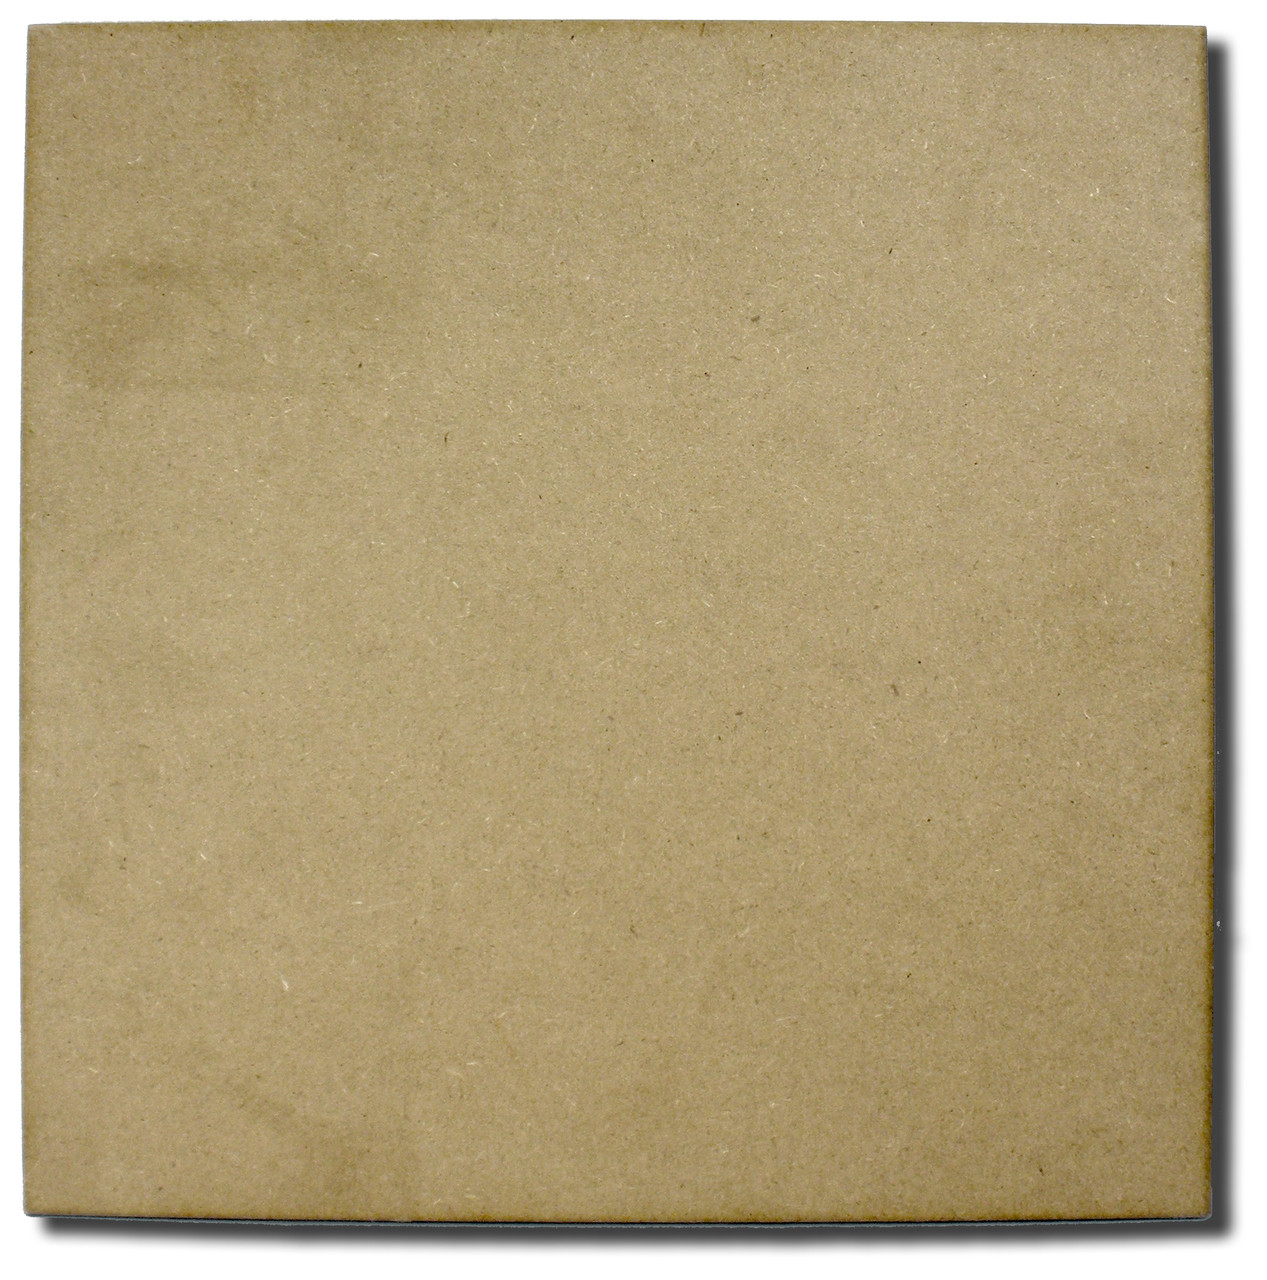 Essential Square Surface - 12" x 12"